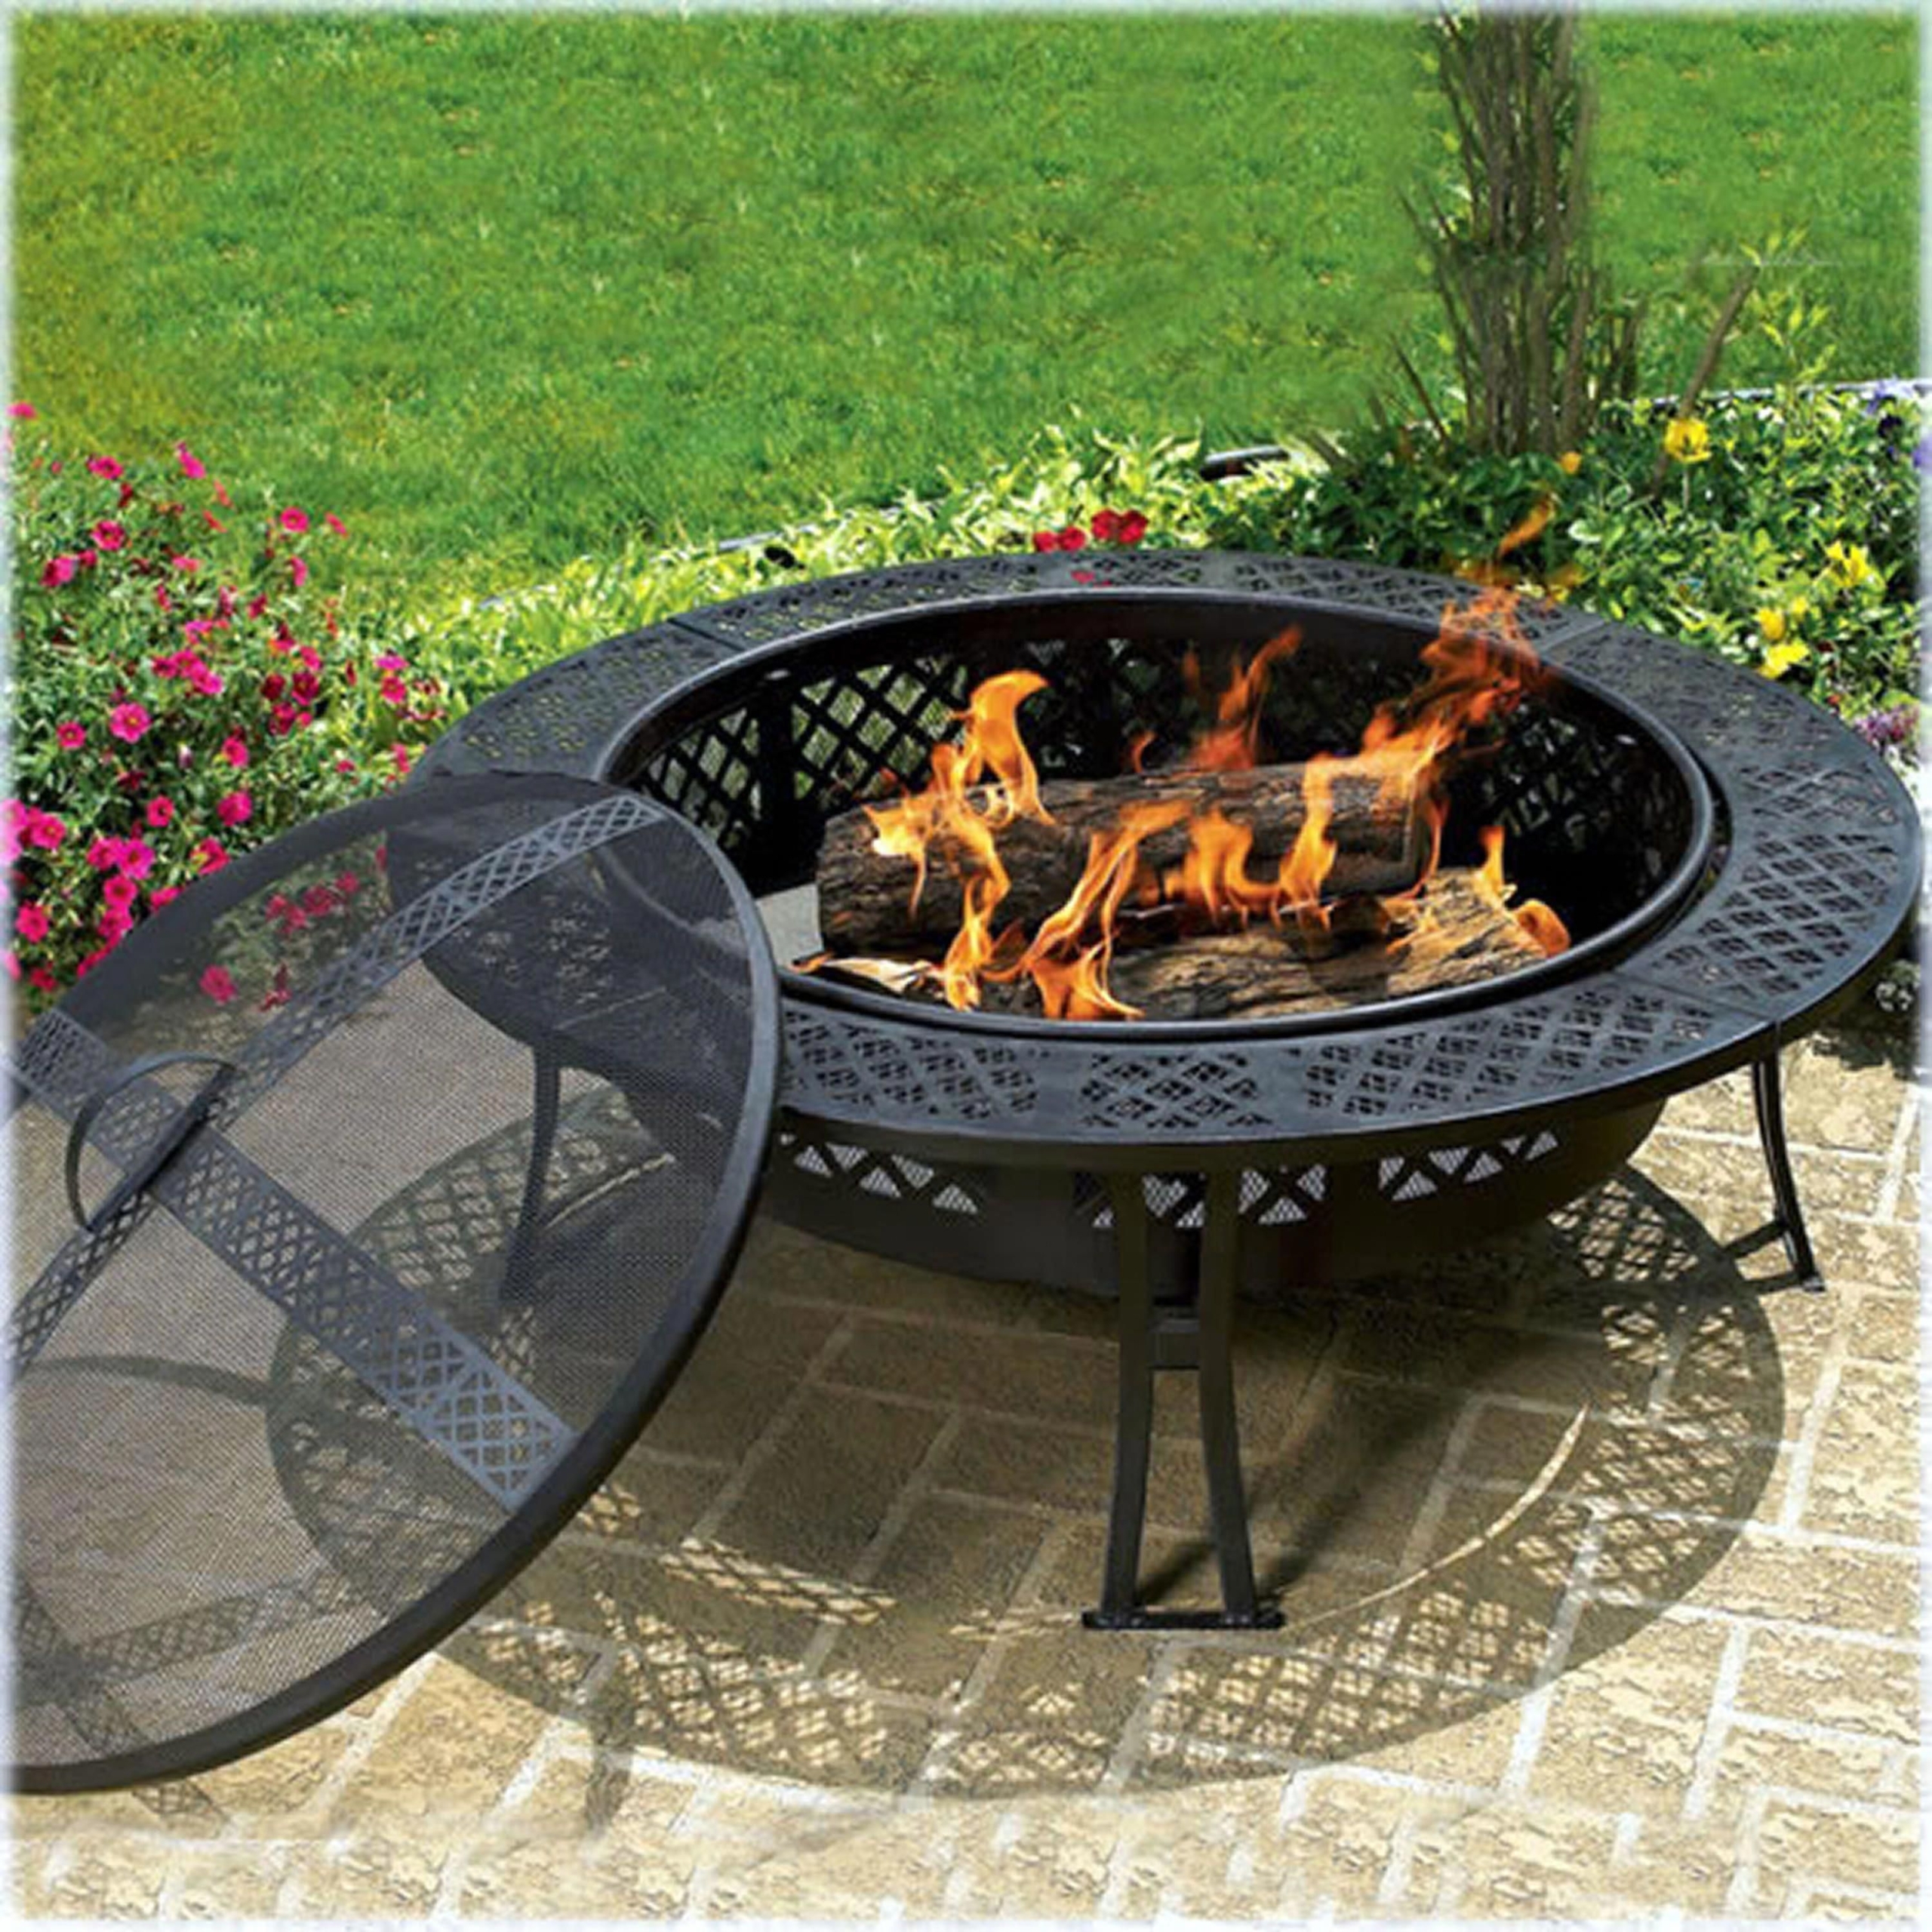 Wood Burning Fire Pit Table Visualhunt, Round Wood Burning Fire Pit